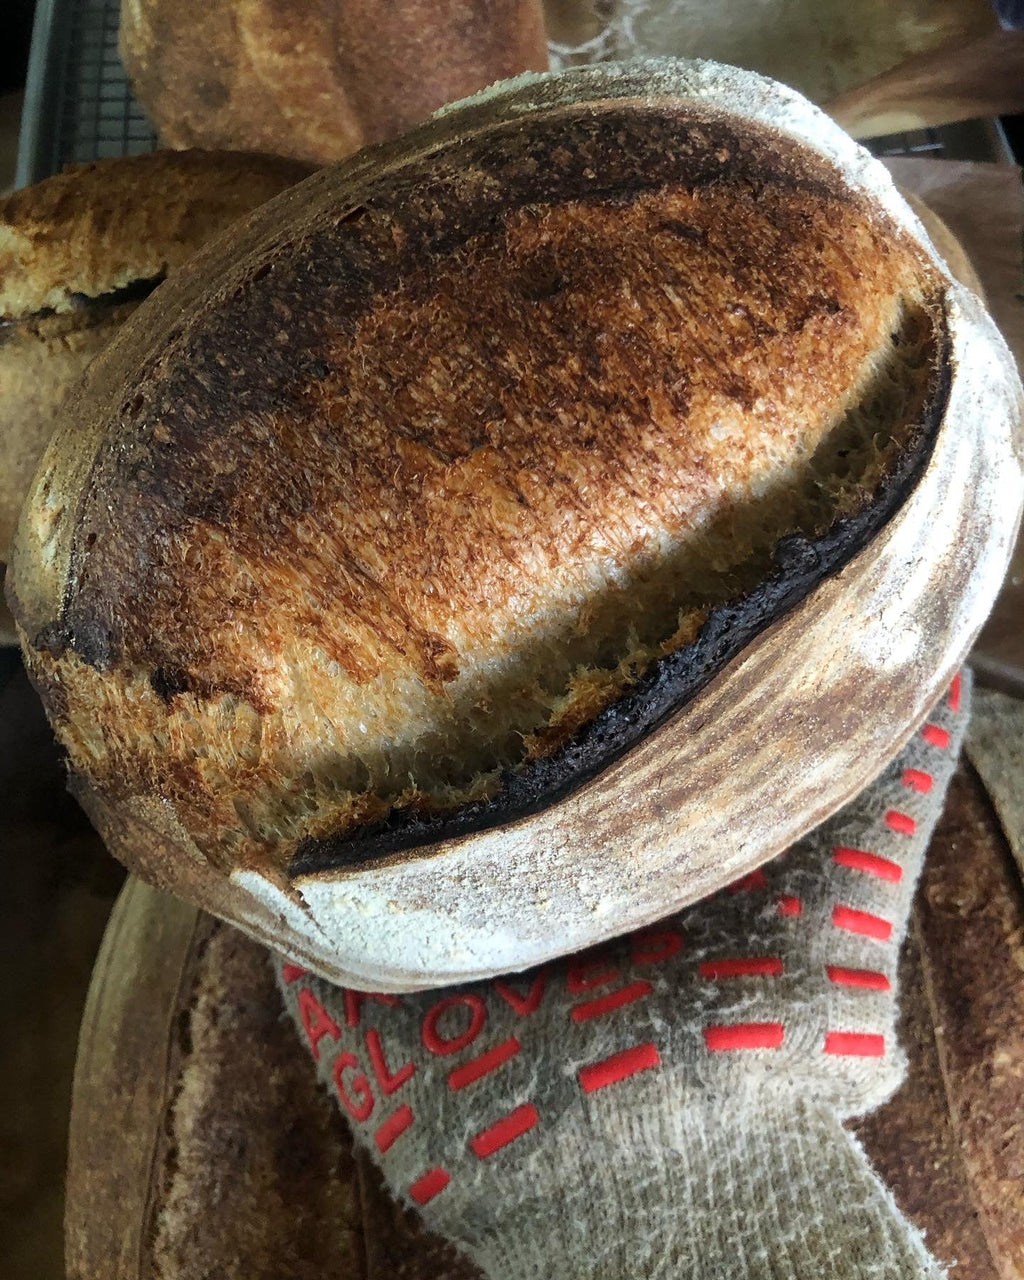 WED MAR 6th Crusty Country Sourdough Porch Pick up 4-9pm OR Purplebrown 430-6p